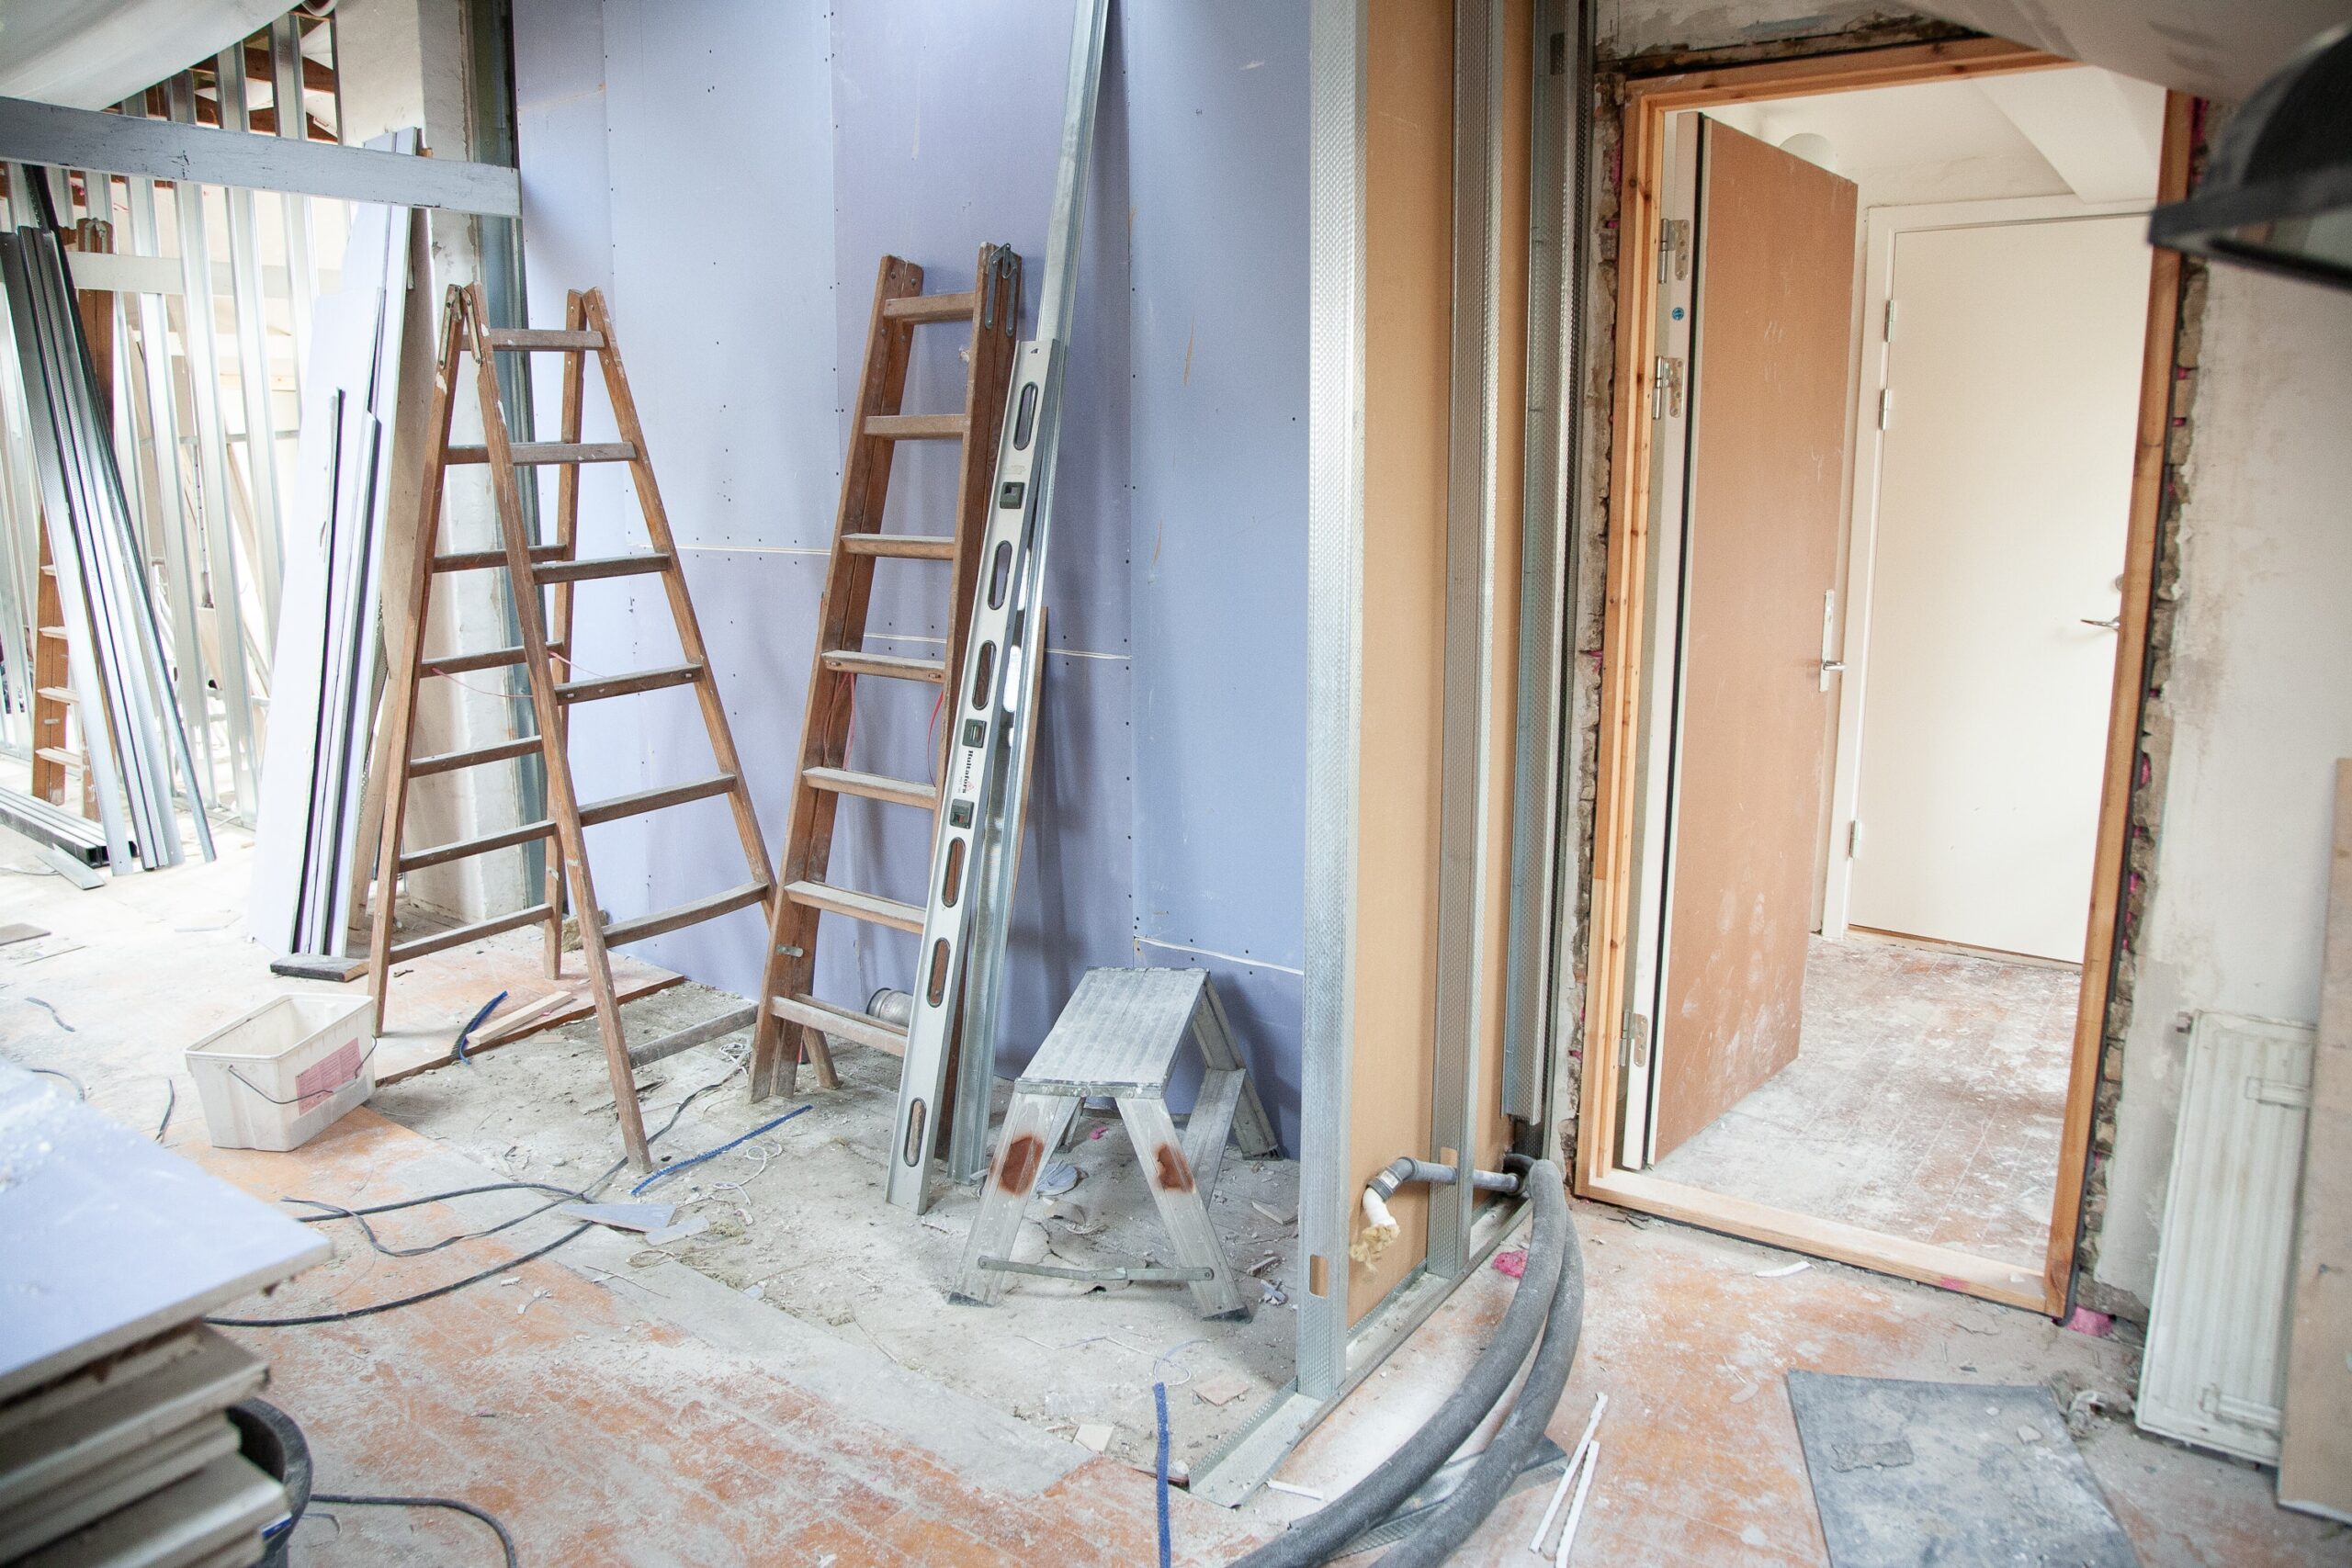 Selecting a Construction Company for Home Renovation